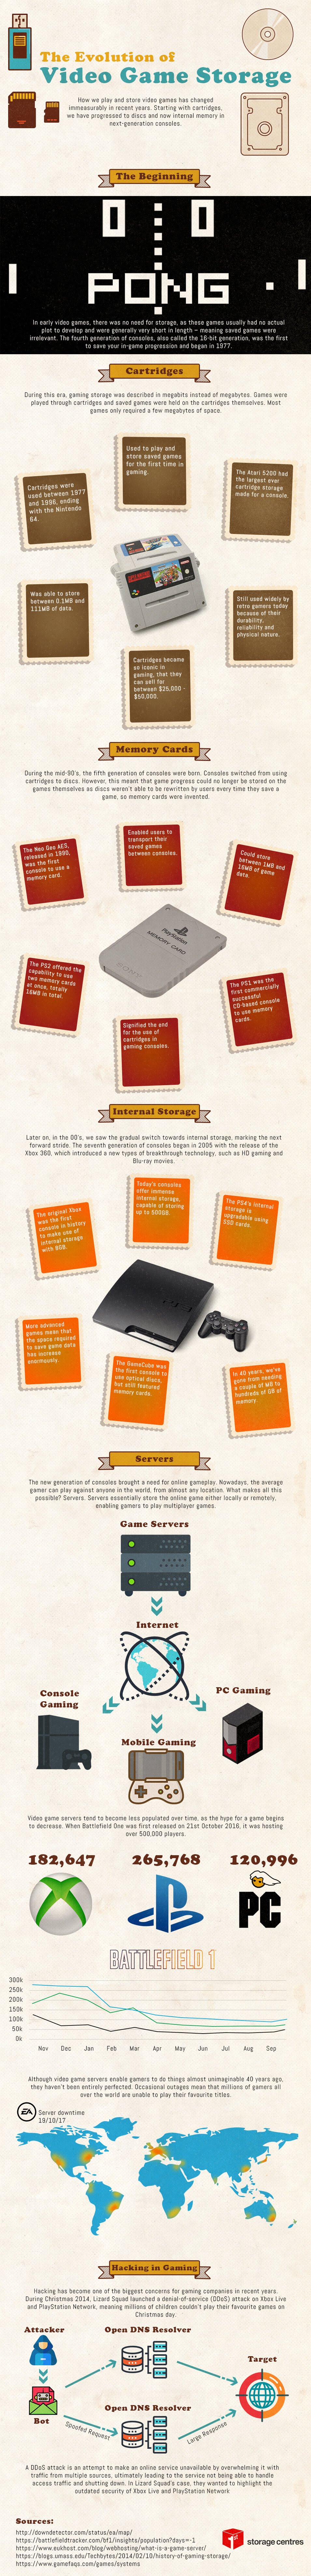 The Evolution of Video Game Storage - #infographic